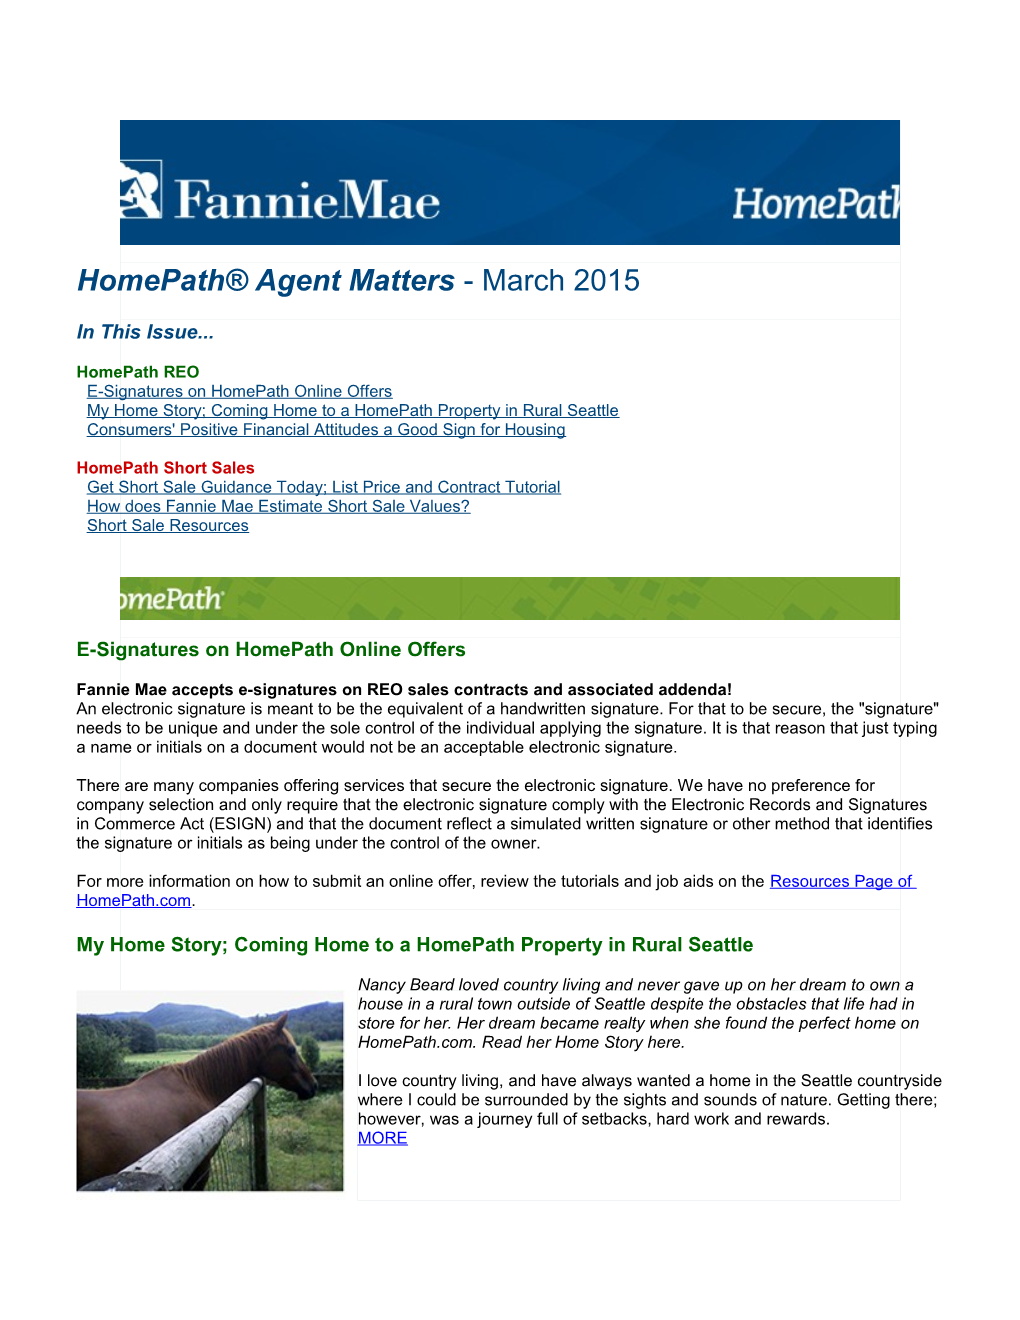 Have the Homeowner Sign the Fannie Mae Homeowner Authorization Form